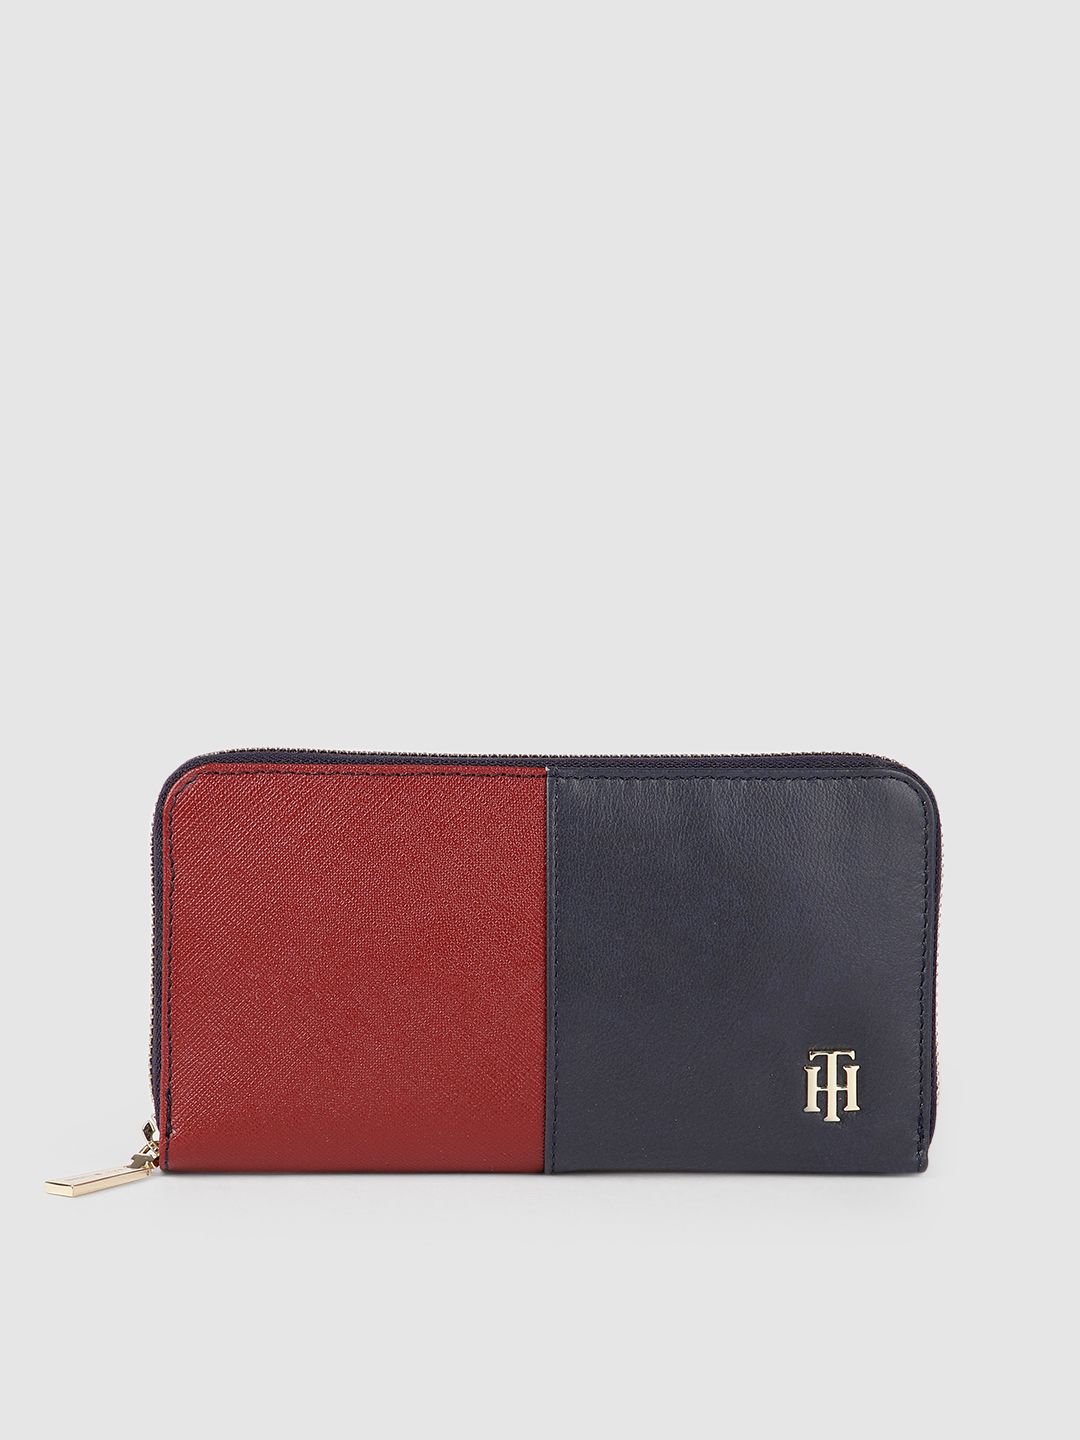 Tommy Hilfiger Women Red & Navy Blue Colourblocked Leather Zip Around Wallet Price in India